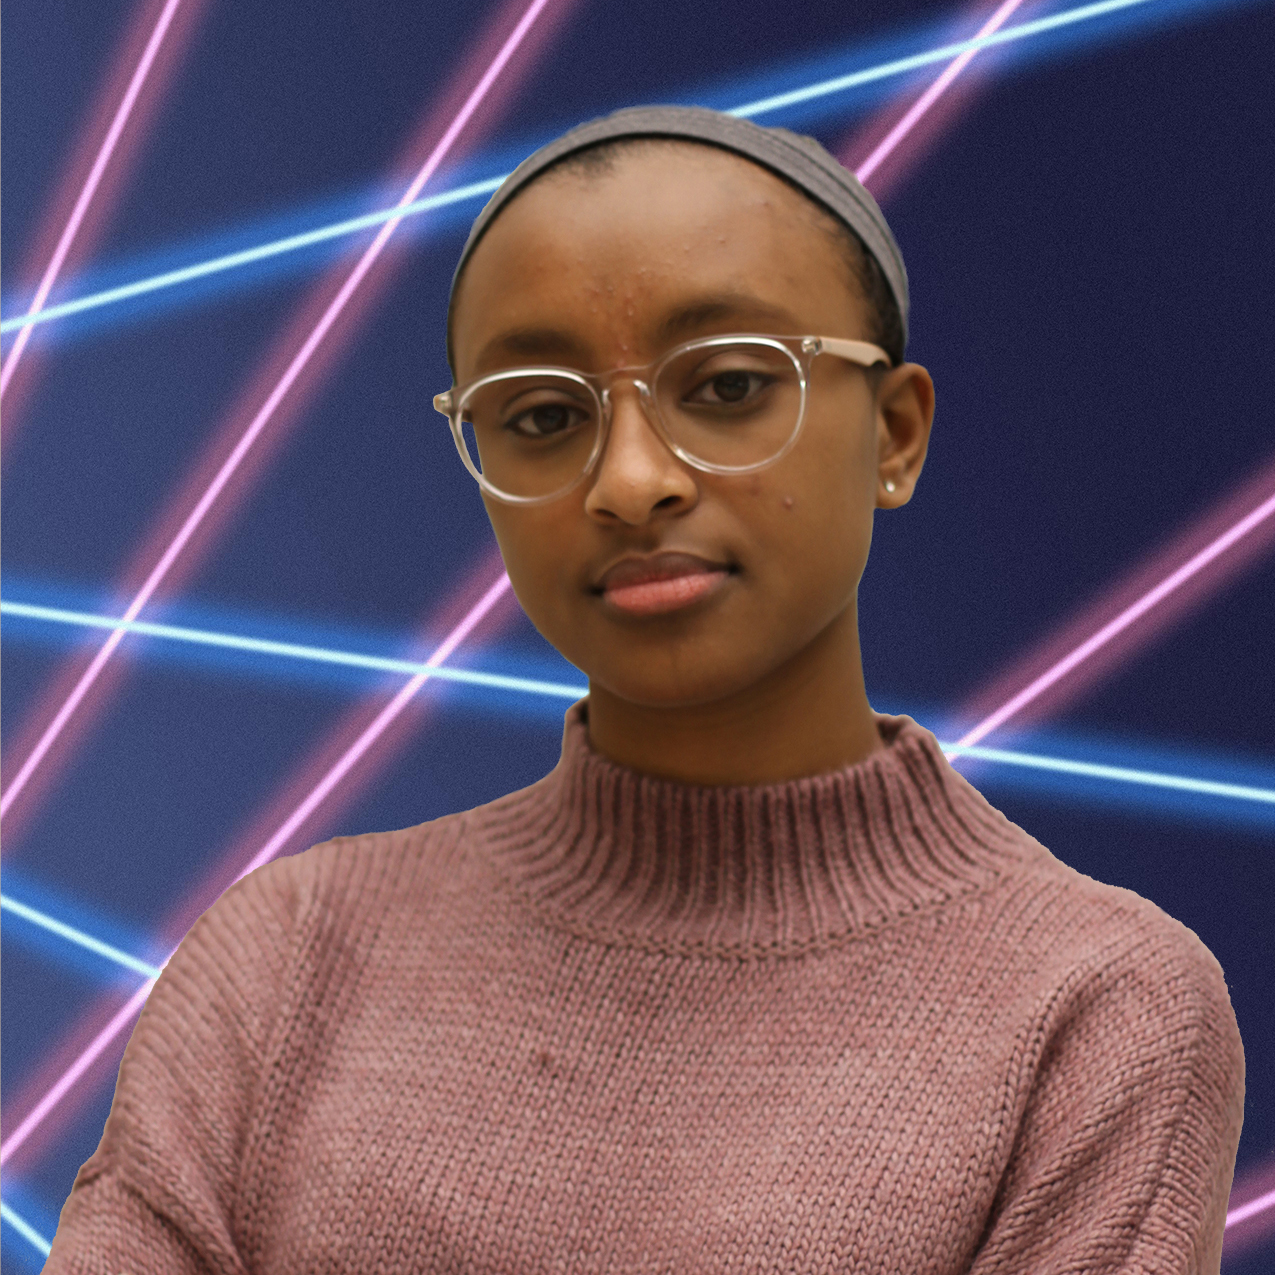 Naomi in front of laser background